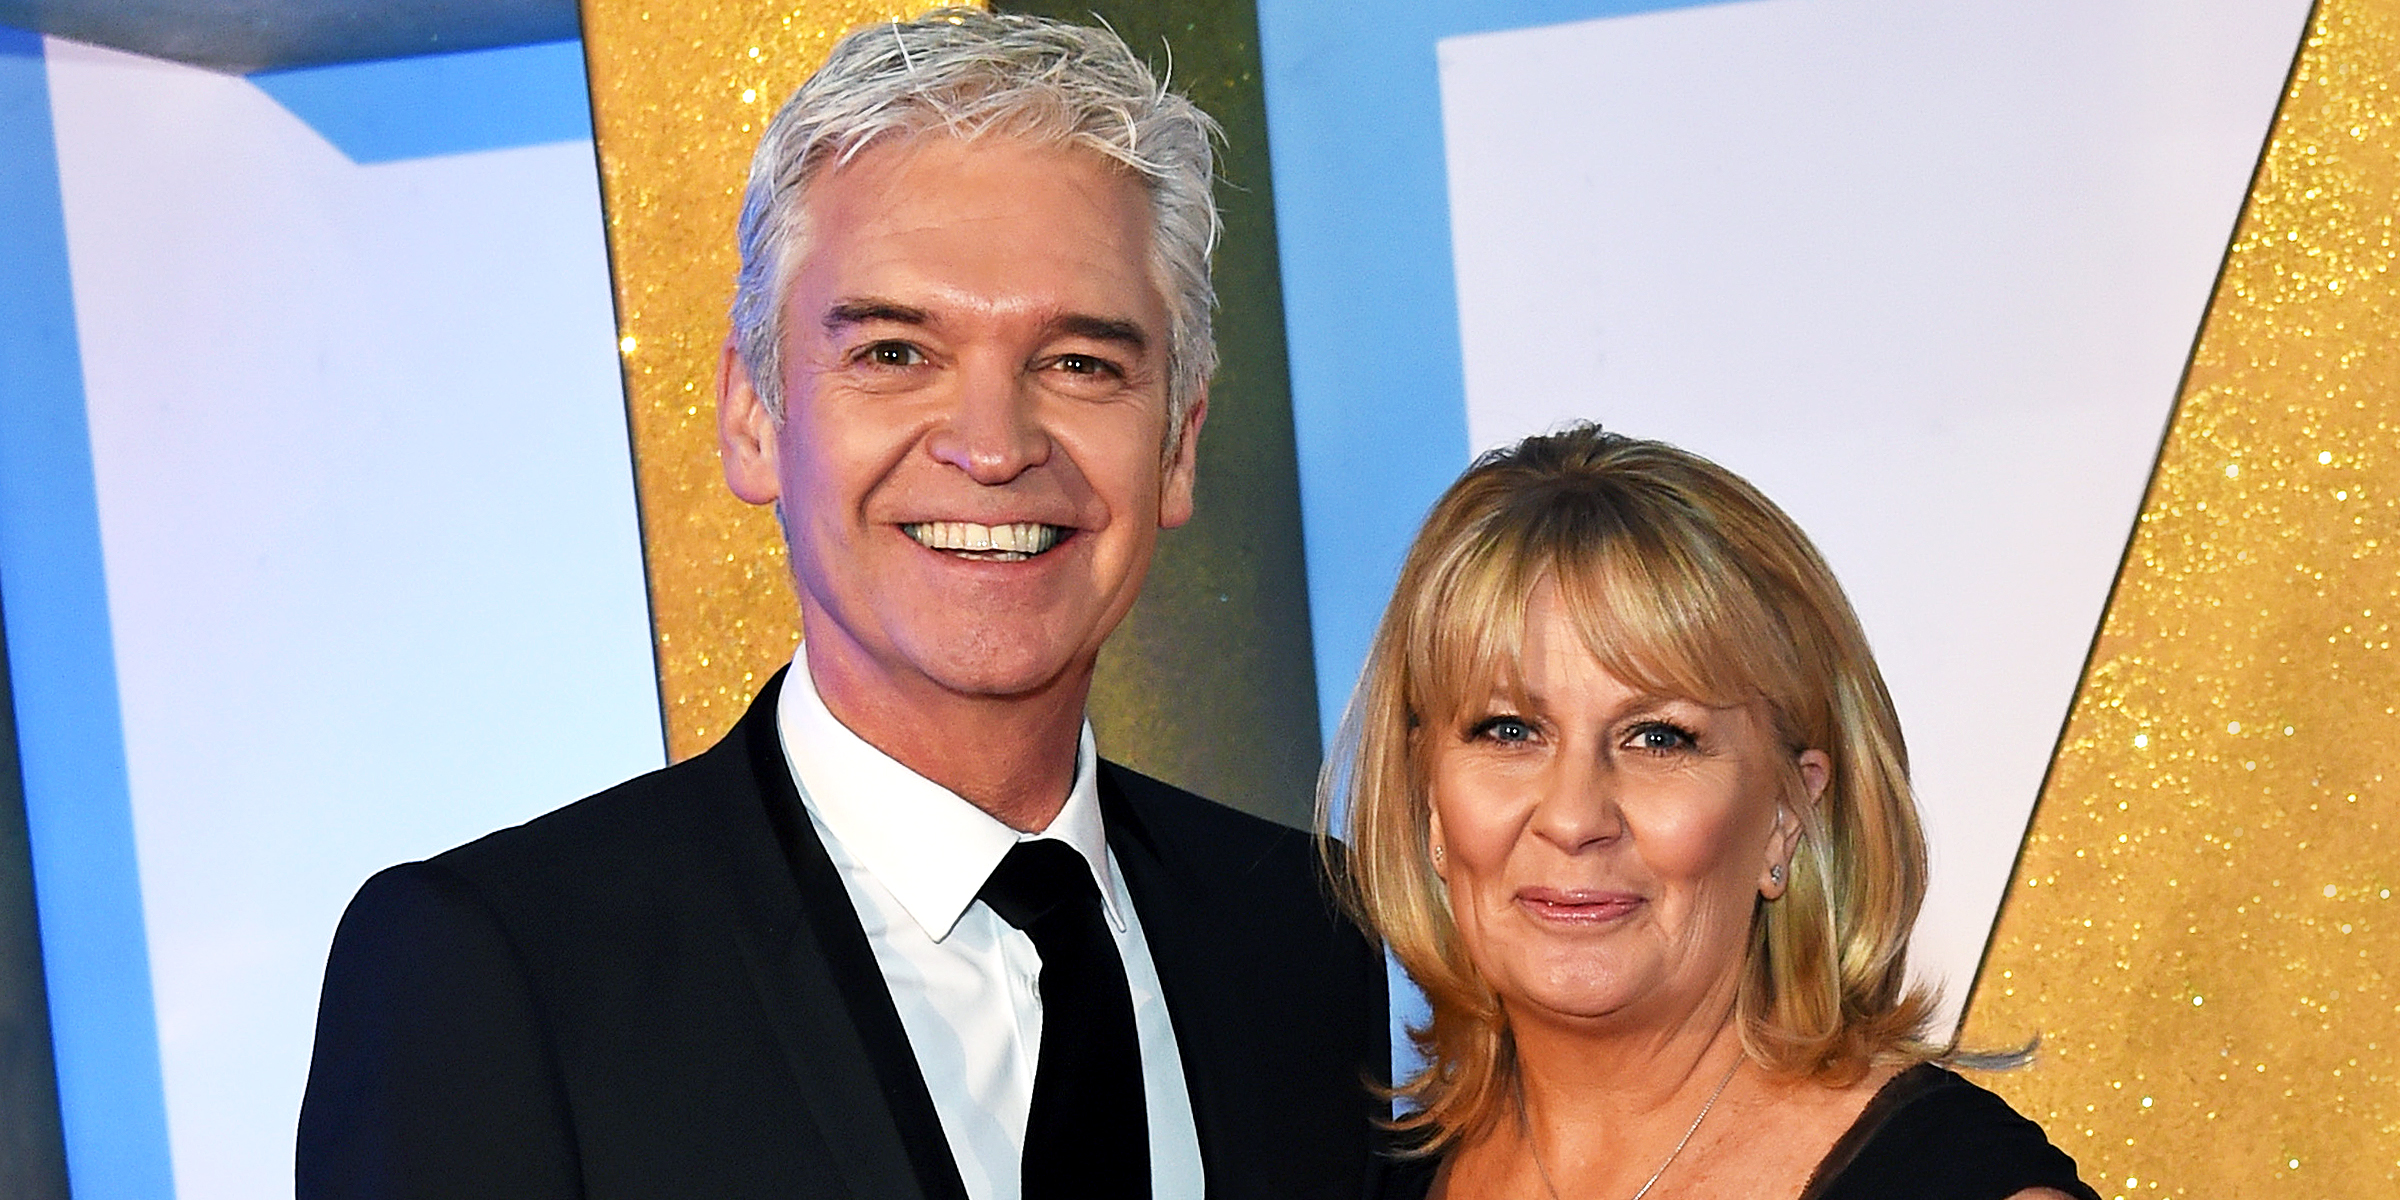 Phillip Schofield and Stephanie Lowe | Source: Getty Images